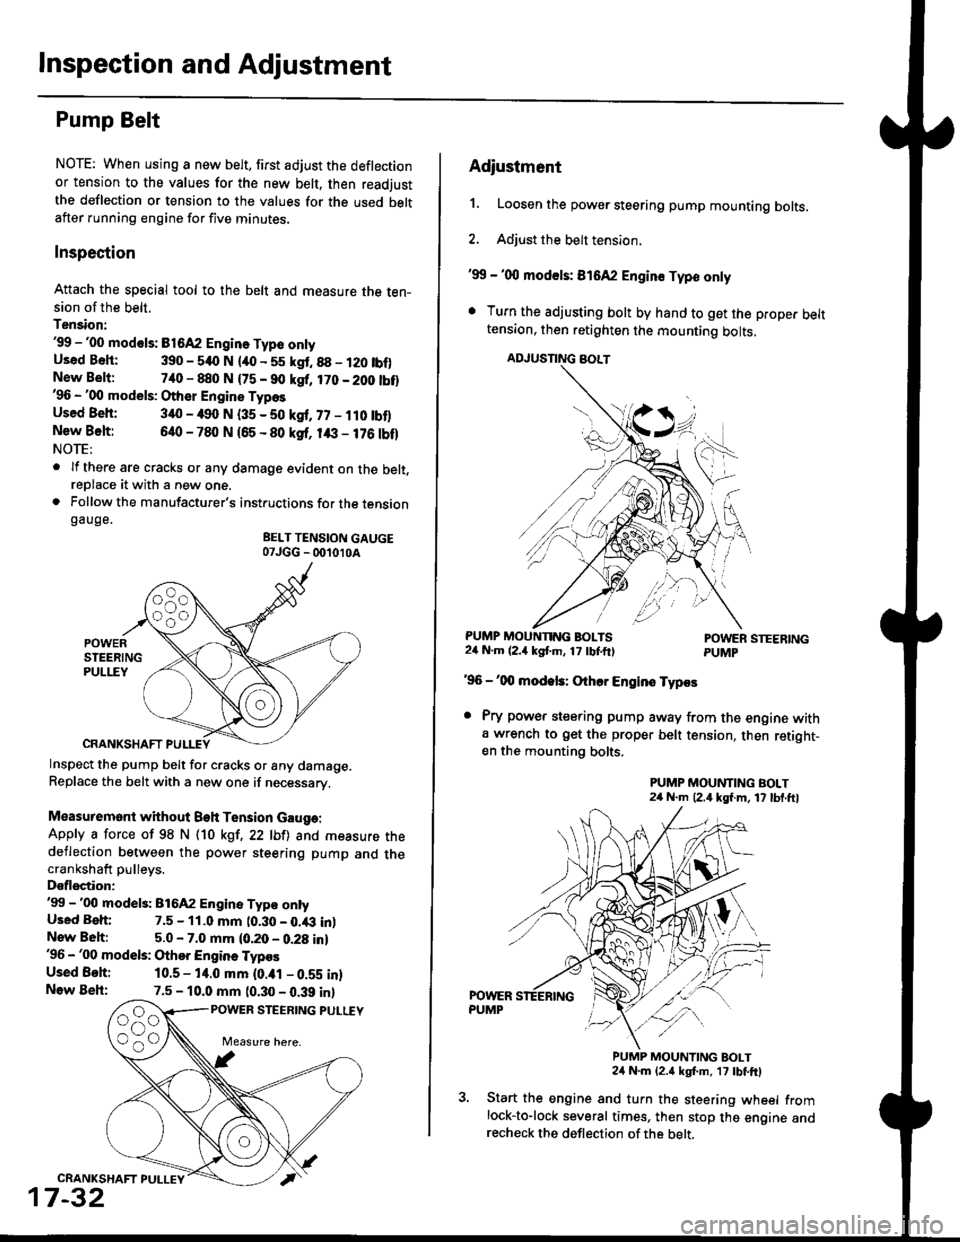 HONDA CIVIC 1996 6.G User Guide Inspection and Adjustment
Pump Belt
NOTE: When using a new belt, first adjust the deflection
or tension to the values for the new belt, then readjust
the deflection or tension to the values for the us